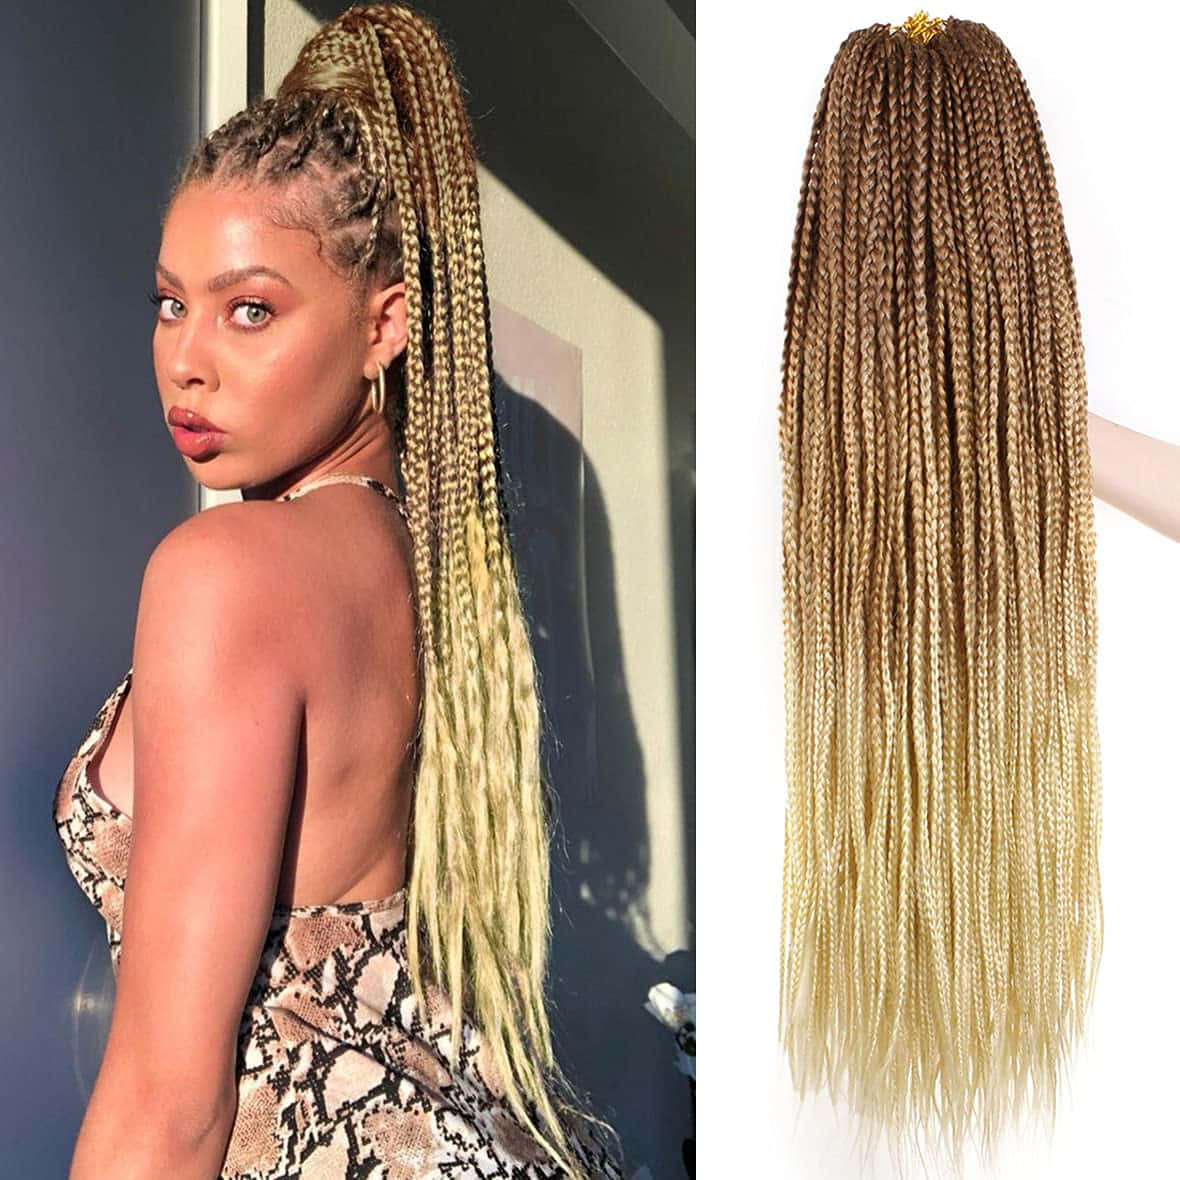 "Elegant Box Braids Hairstyle for 2021 captured - A perfect way to rock your natural hair."